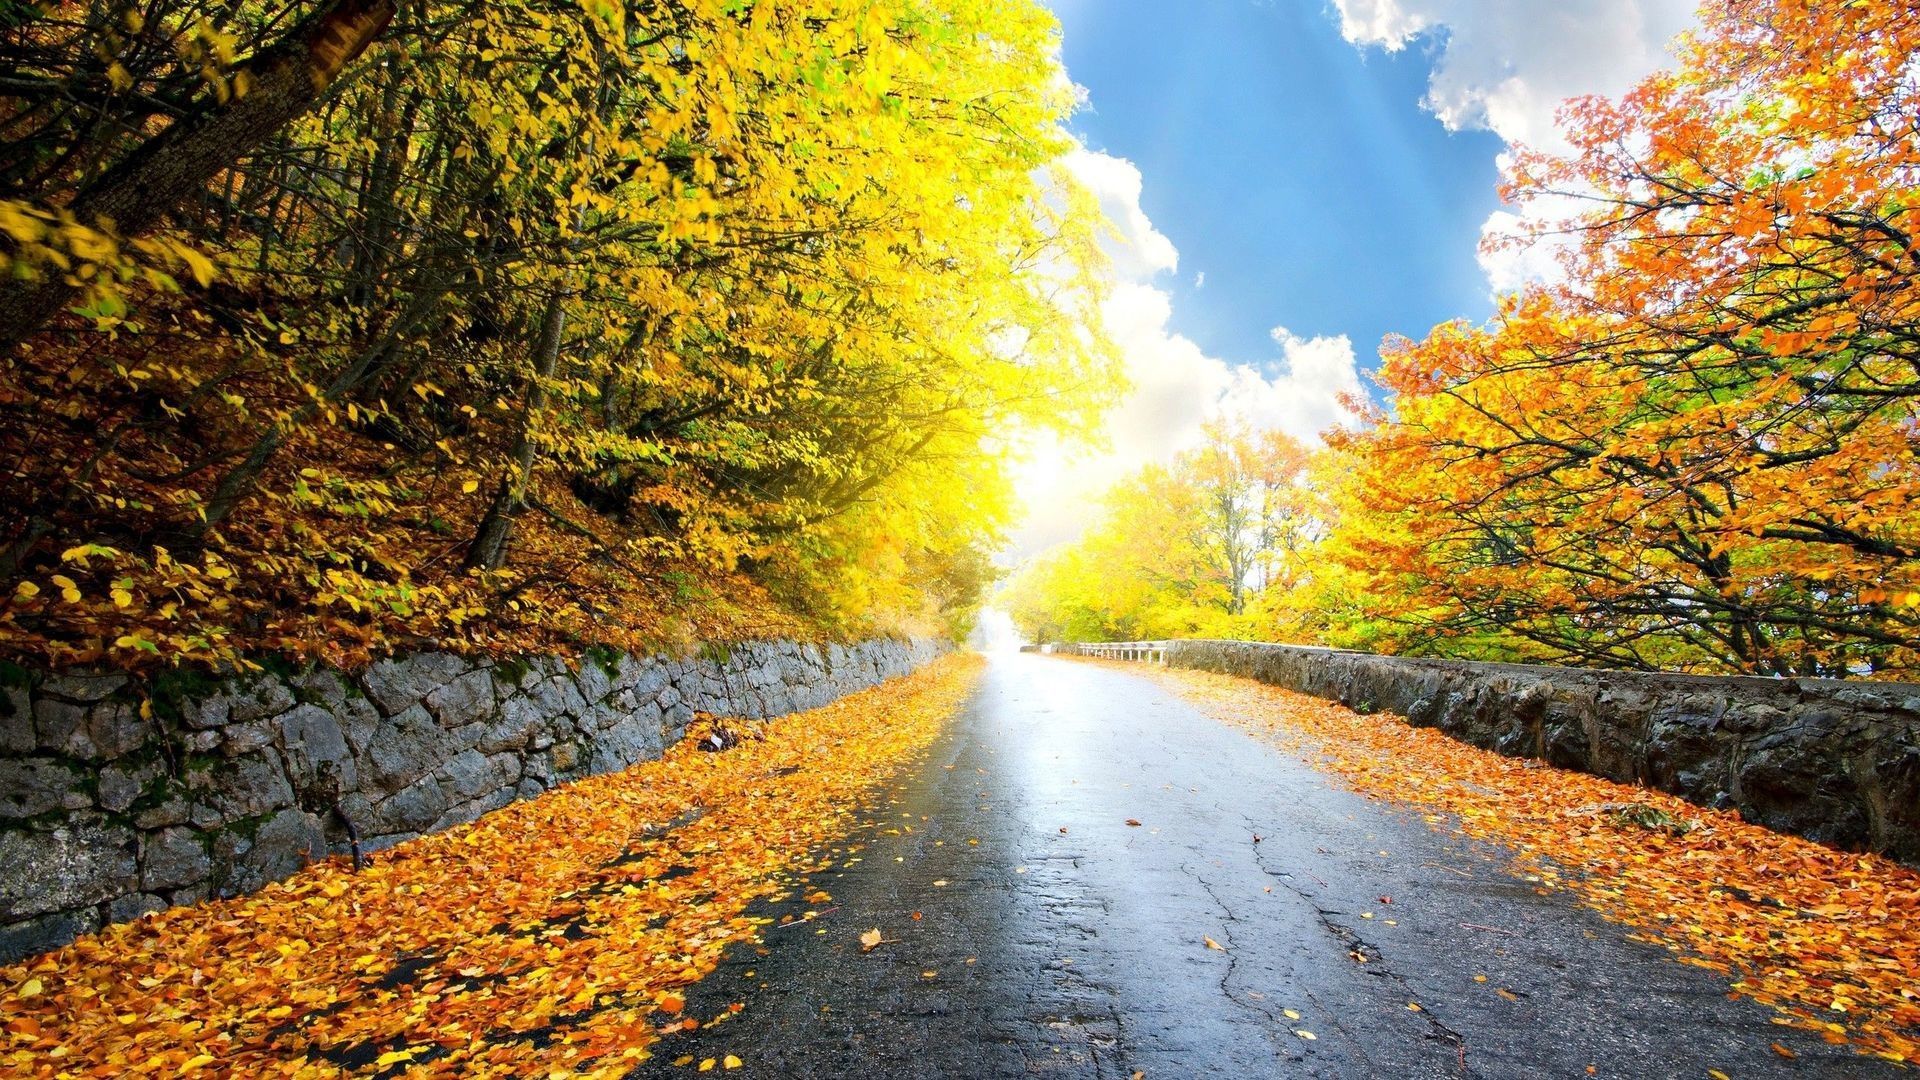 Road in the autumn mountains HD Wallpaper 1920x1080 Road. Mountain wallpaper, Road, Autumn day